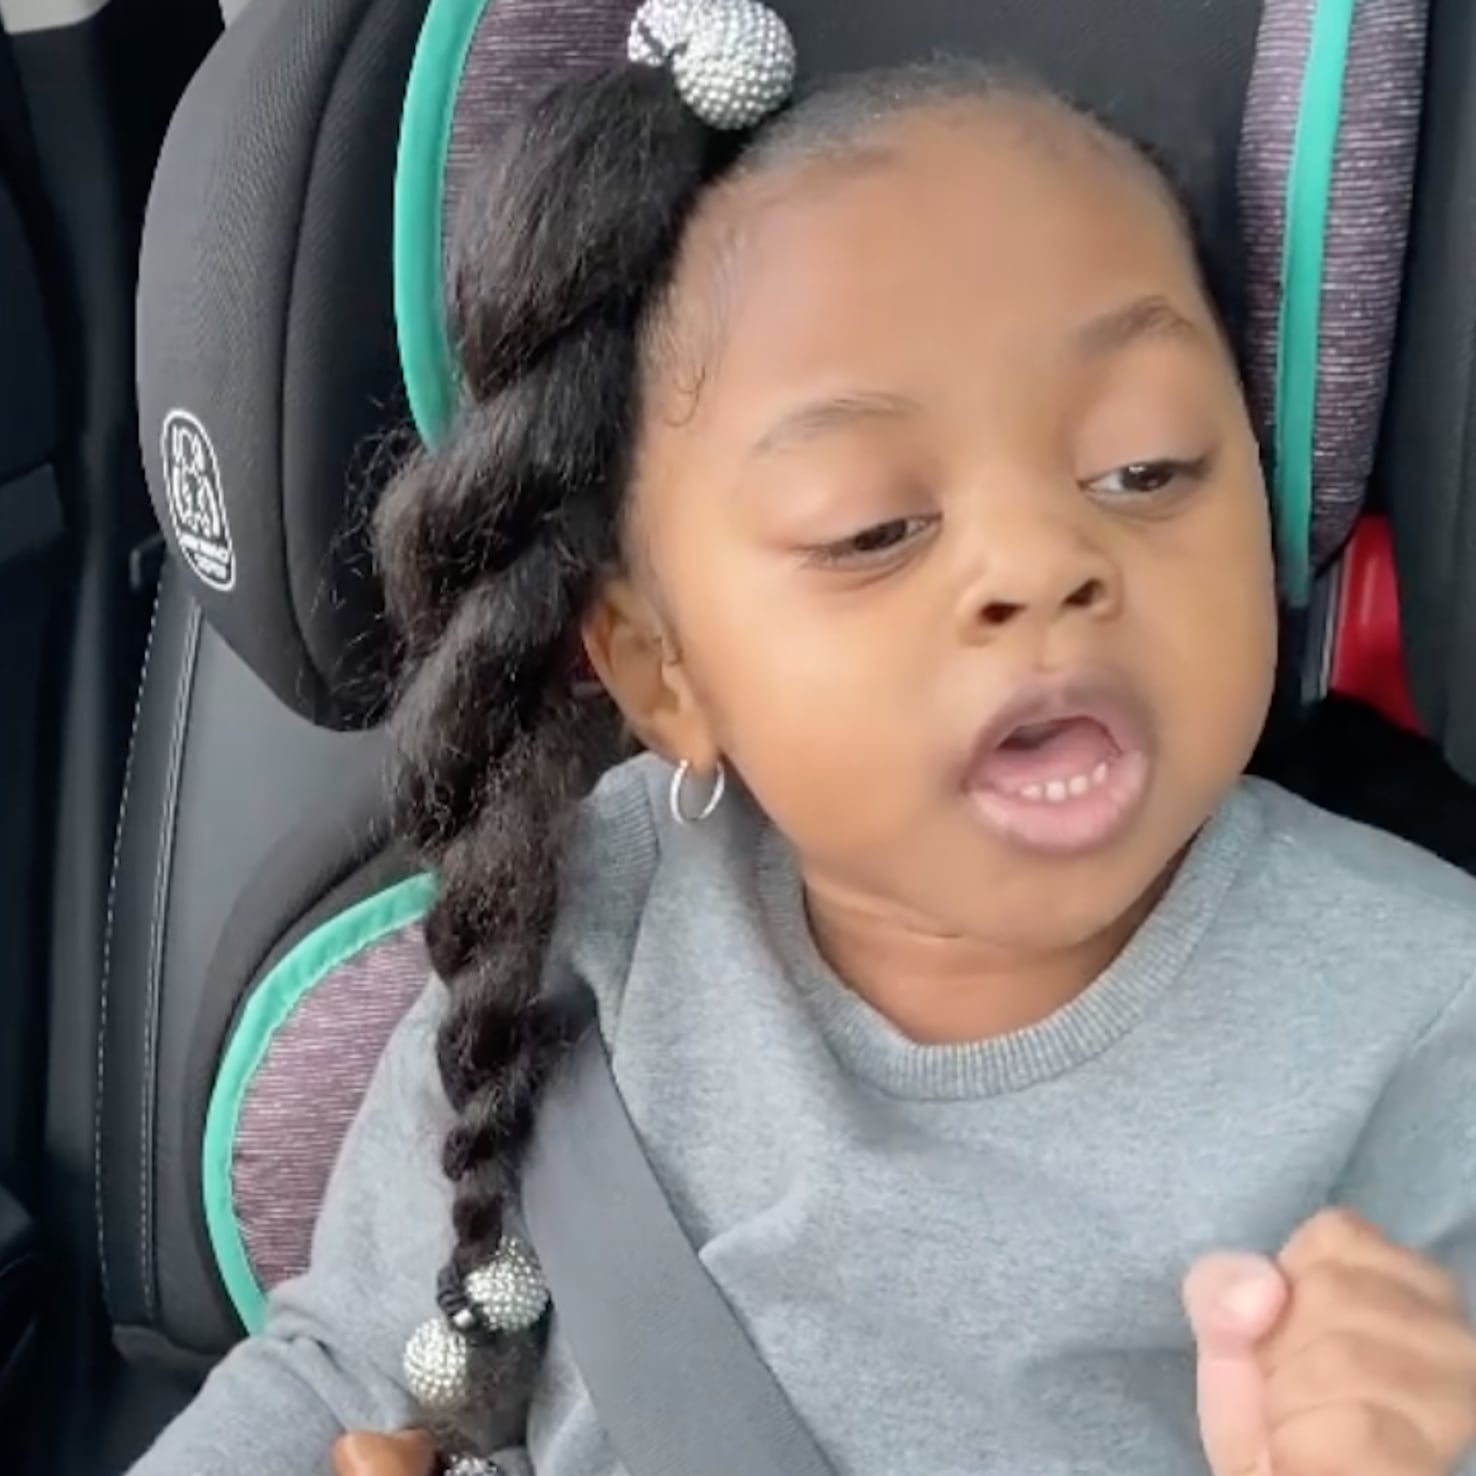 Watch 4-Year-Old Milan Marie's Funny Viral Singing Videos | POPSUGAR Family